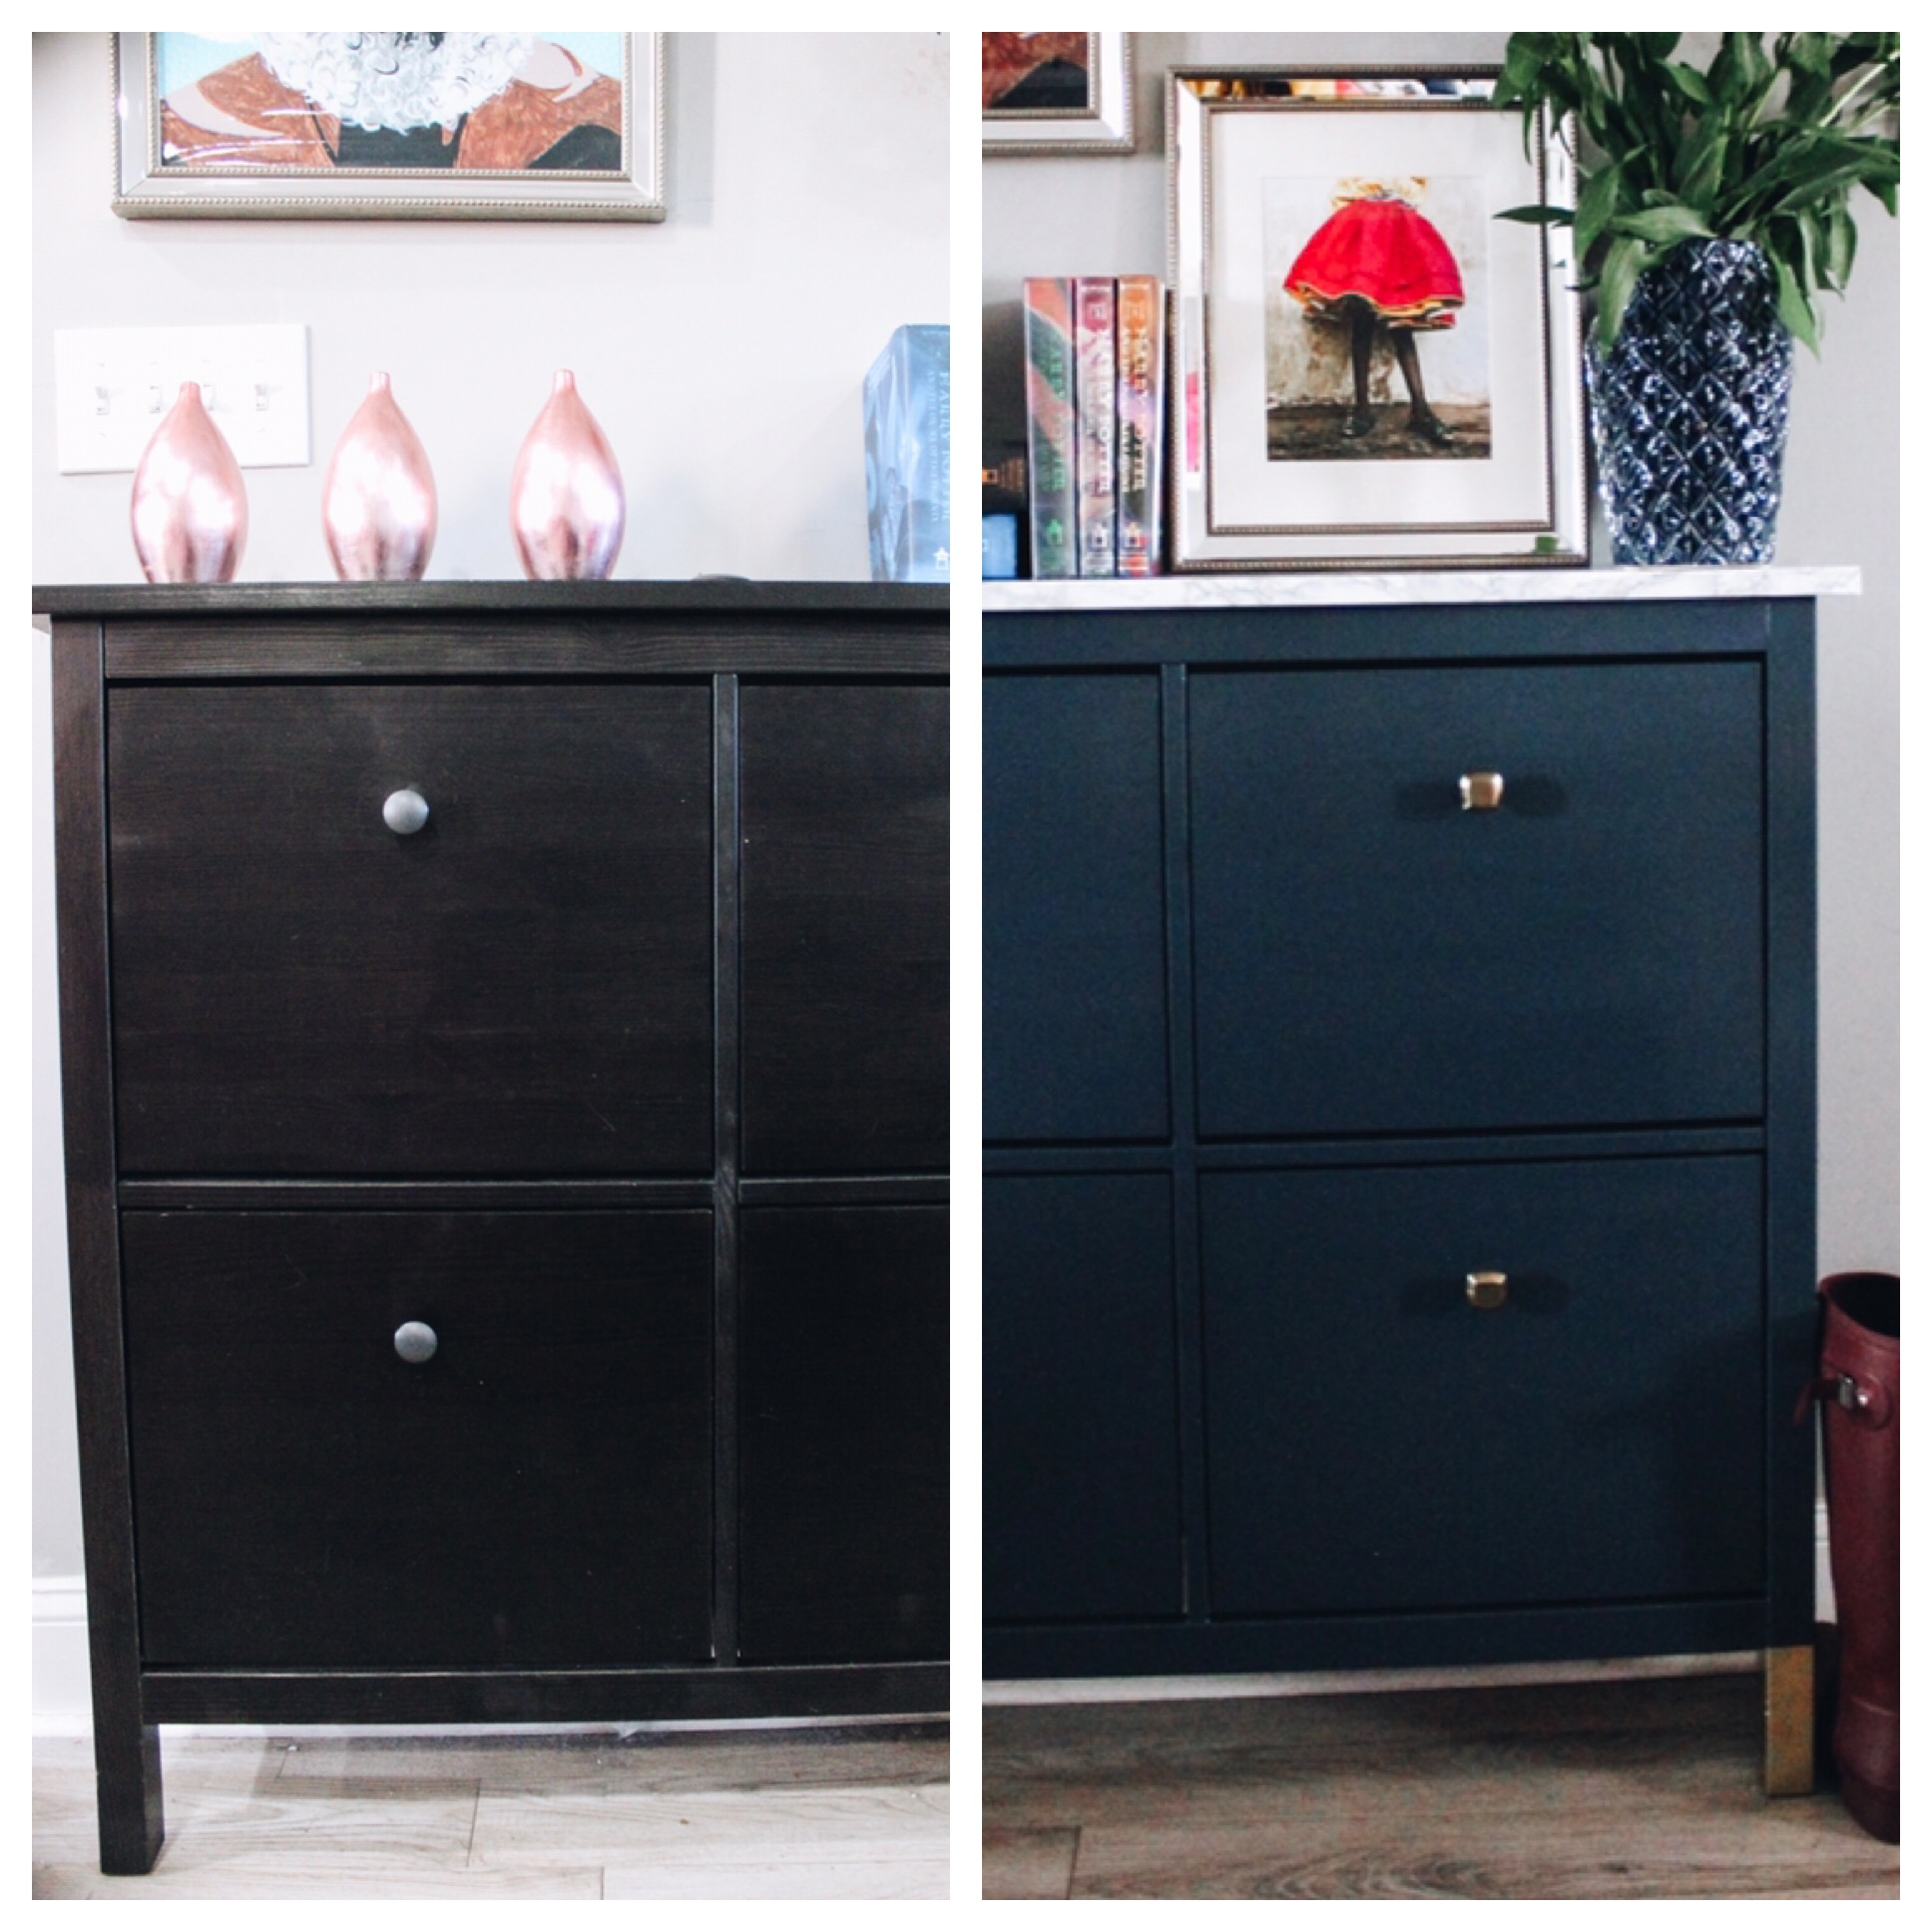 Diy On A Dime Glamming My Ikea Hemnes Shoe Cabinet Randolph And Roses